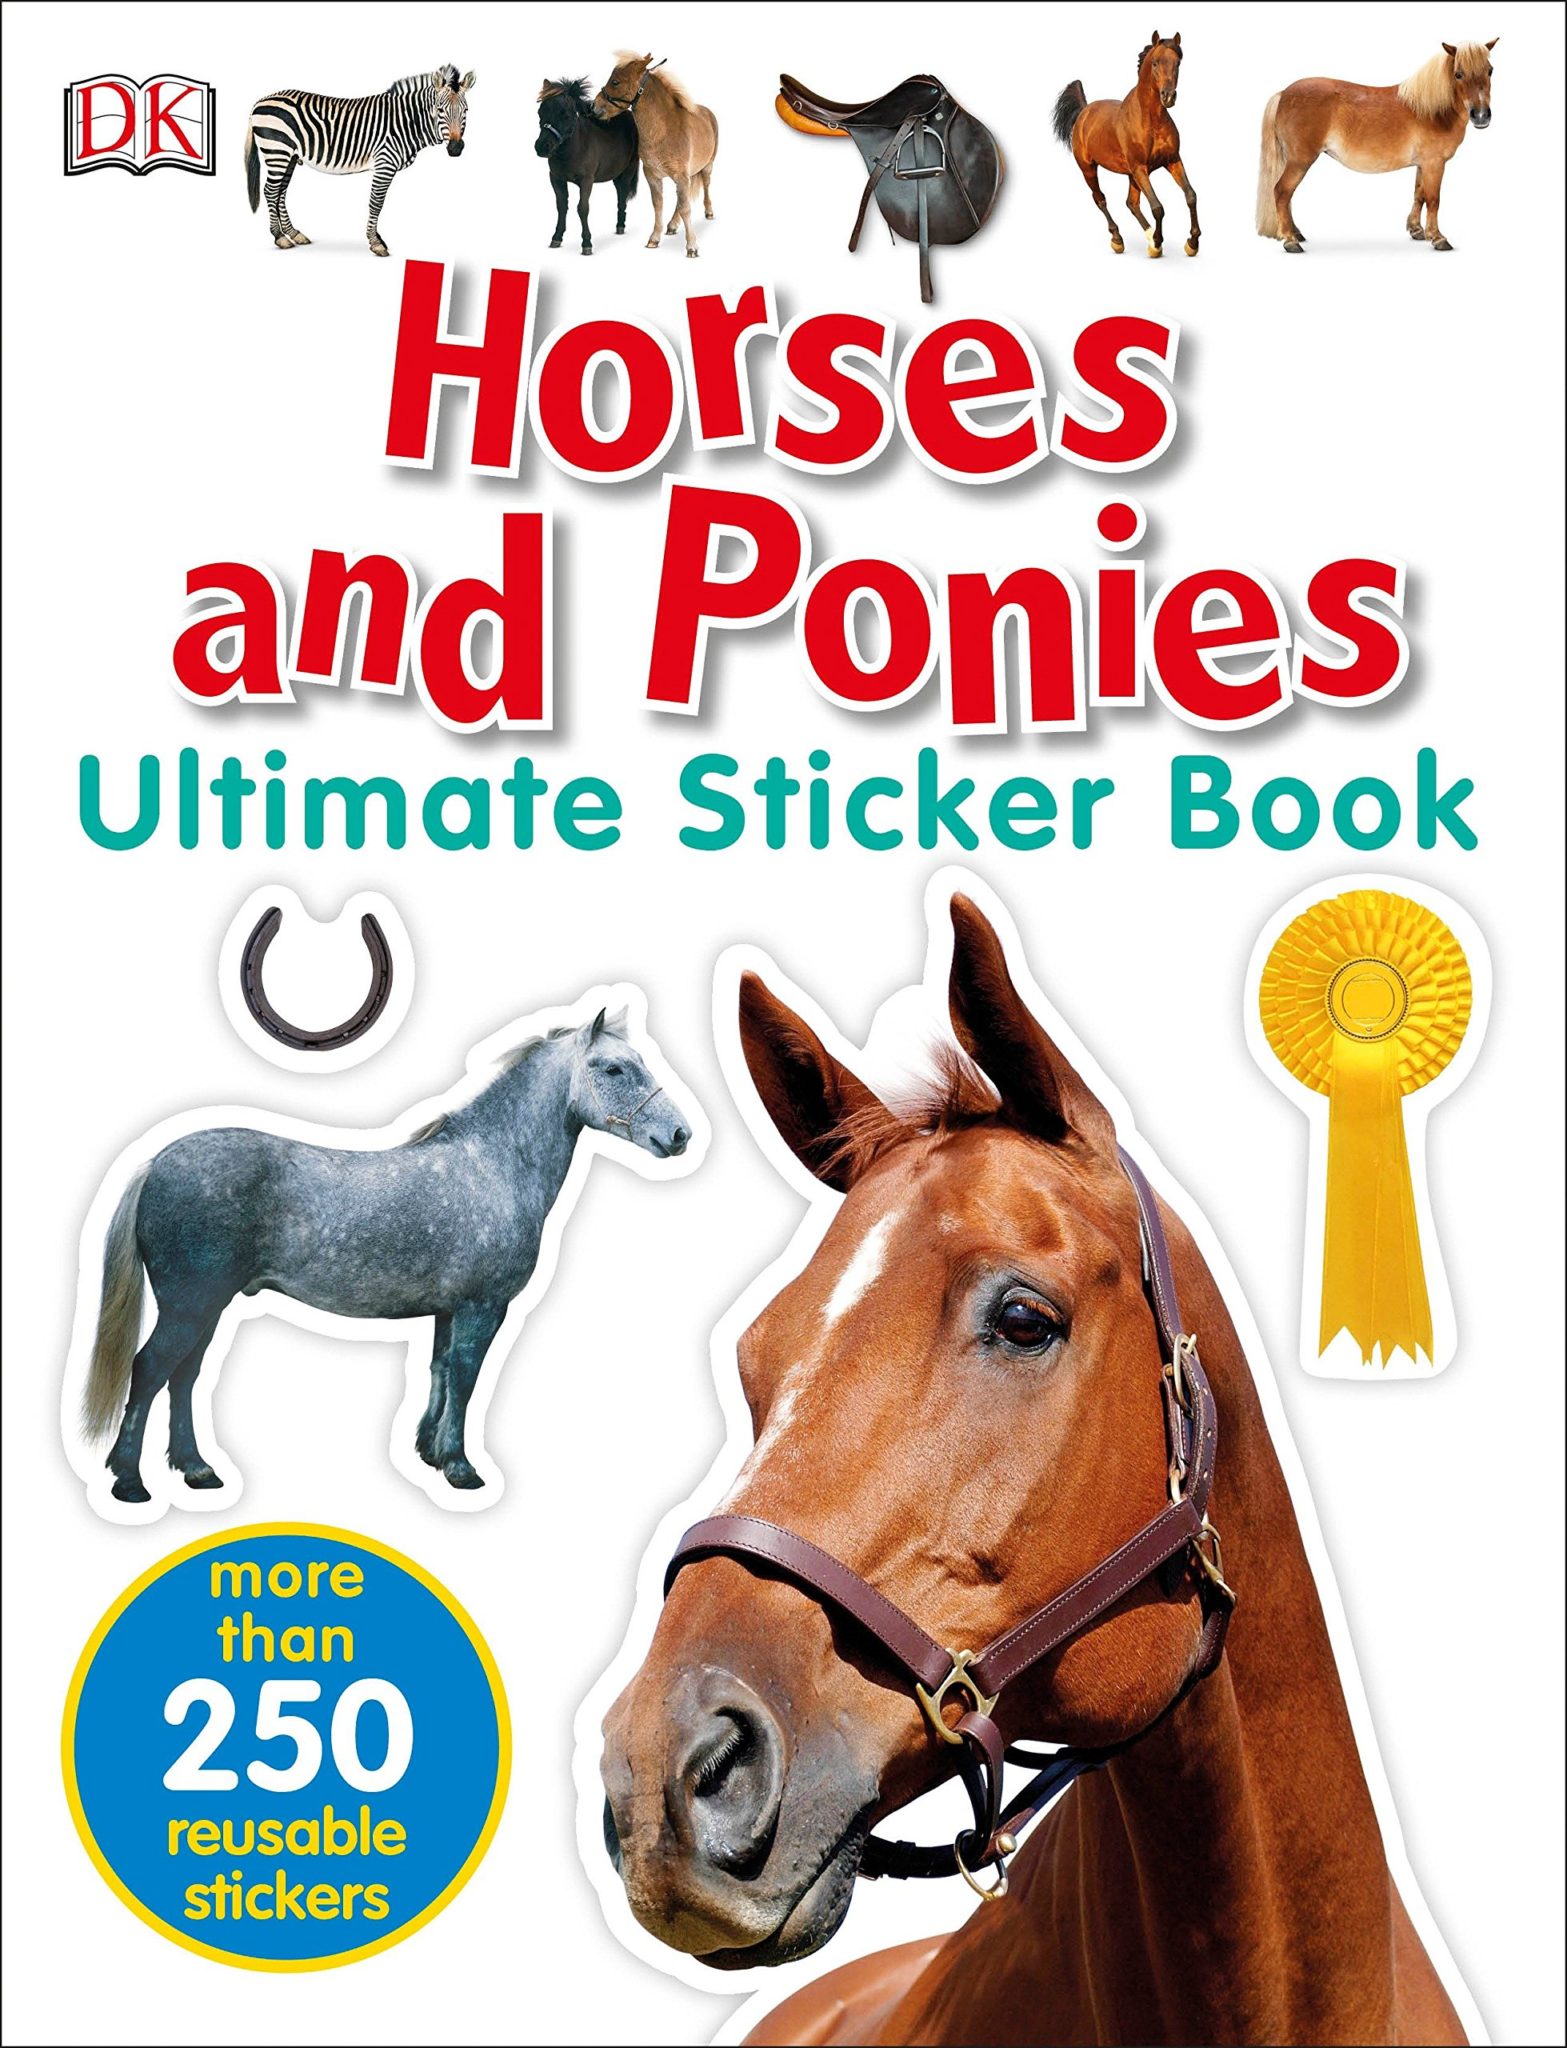 book reviews on horse